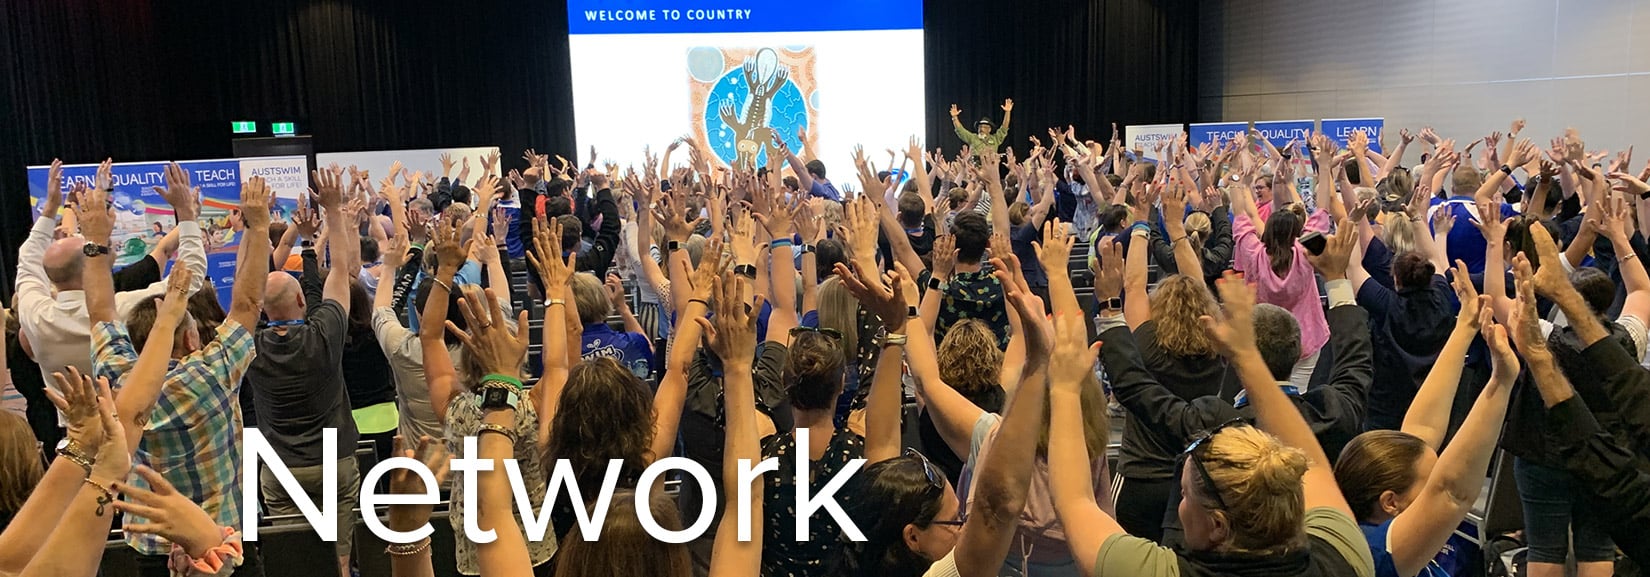 AUSTSWIM Network banner image. Group of event attendees standing with their hand in the air at an AUSTSWIM event. The word Network is layered over the top of the image.